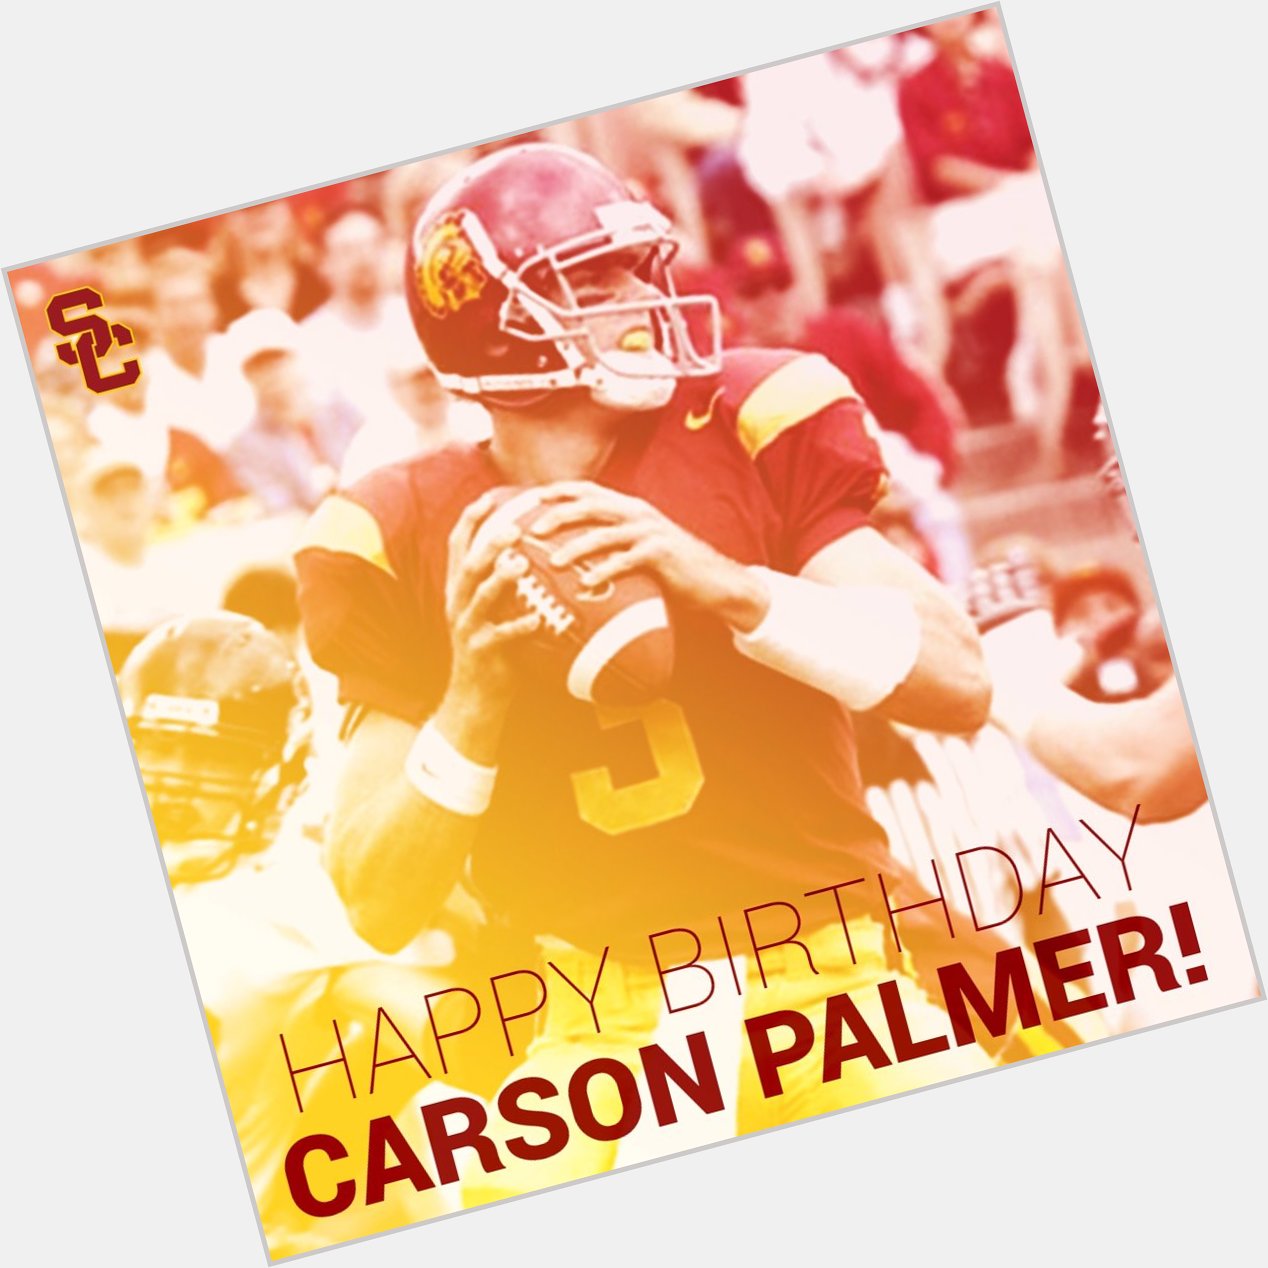 No better way to celebrate than with a dominating win... Happy Birthday Carson Palmer! 